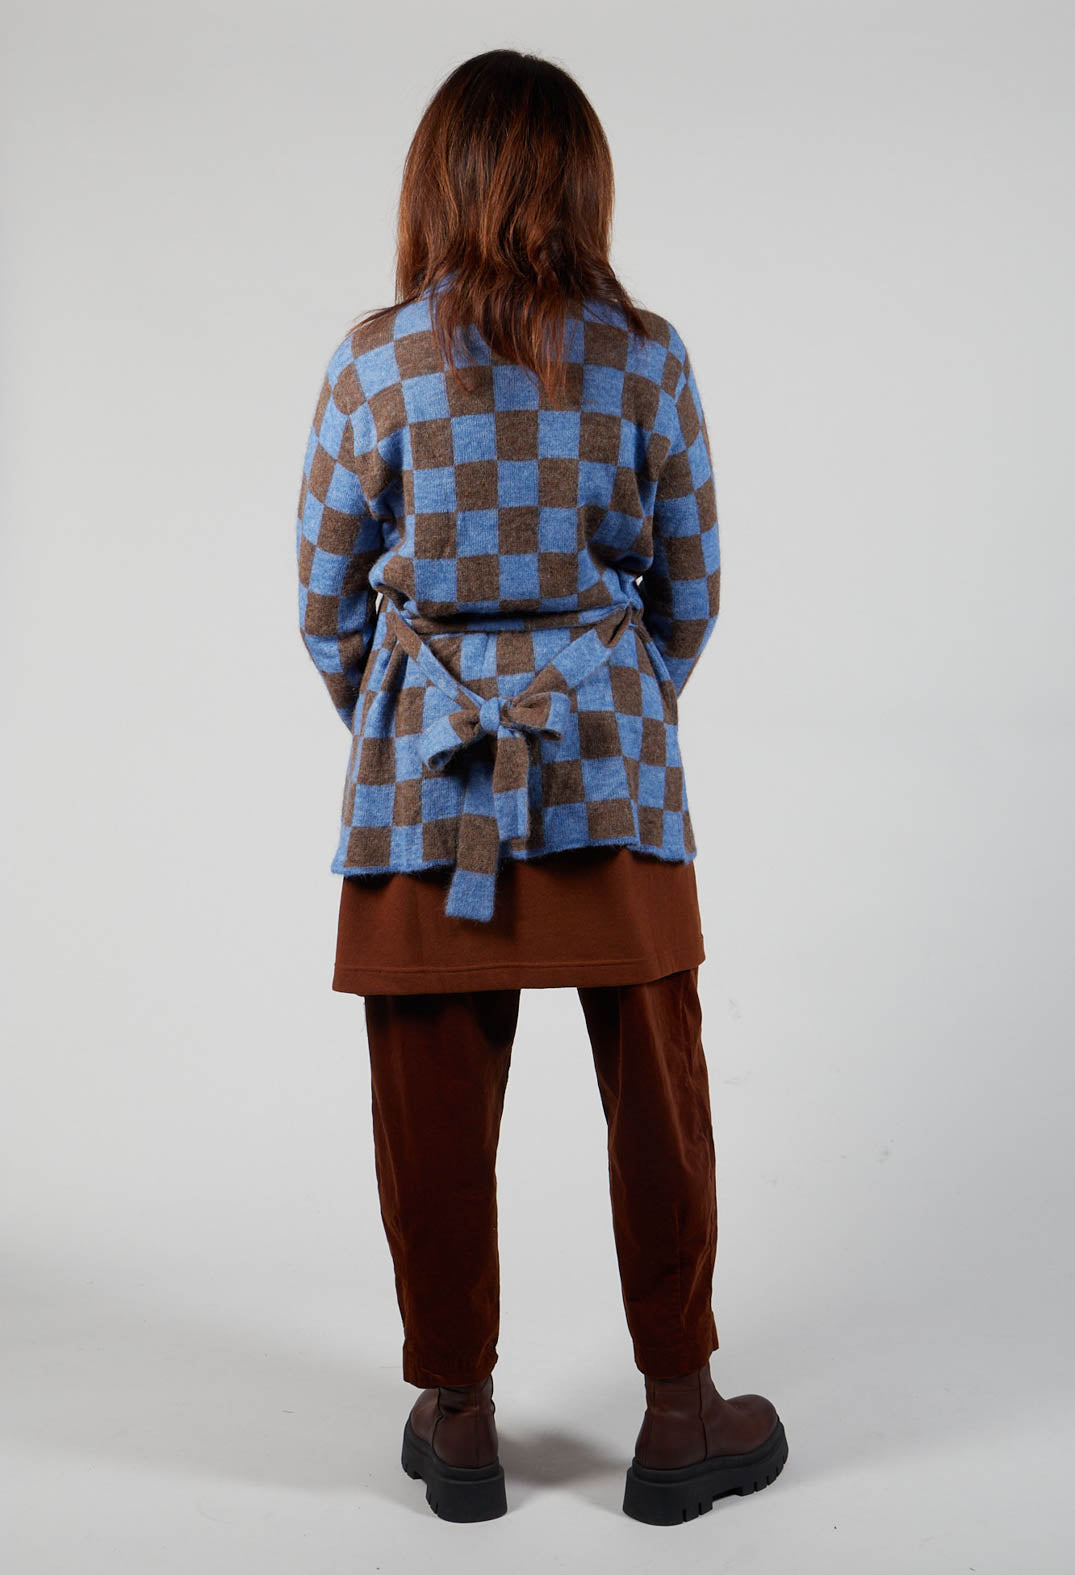 Lauren Knitted Shirt in Blue and Brown